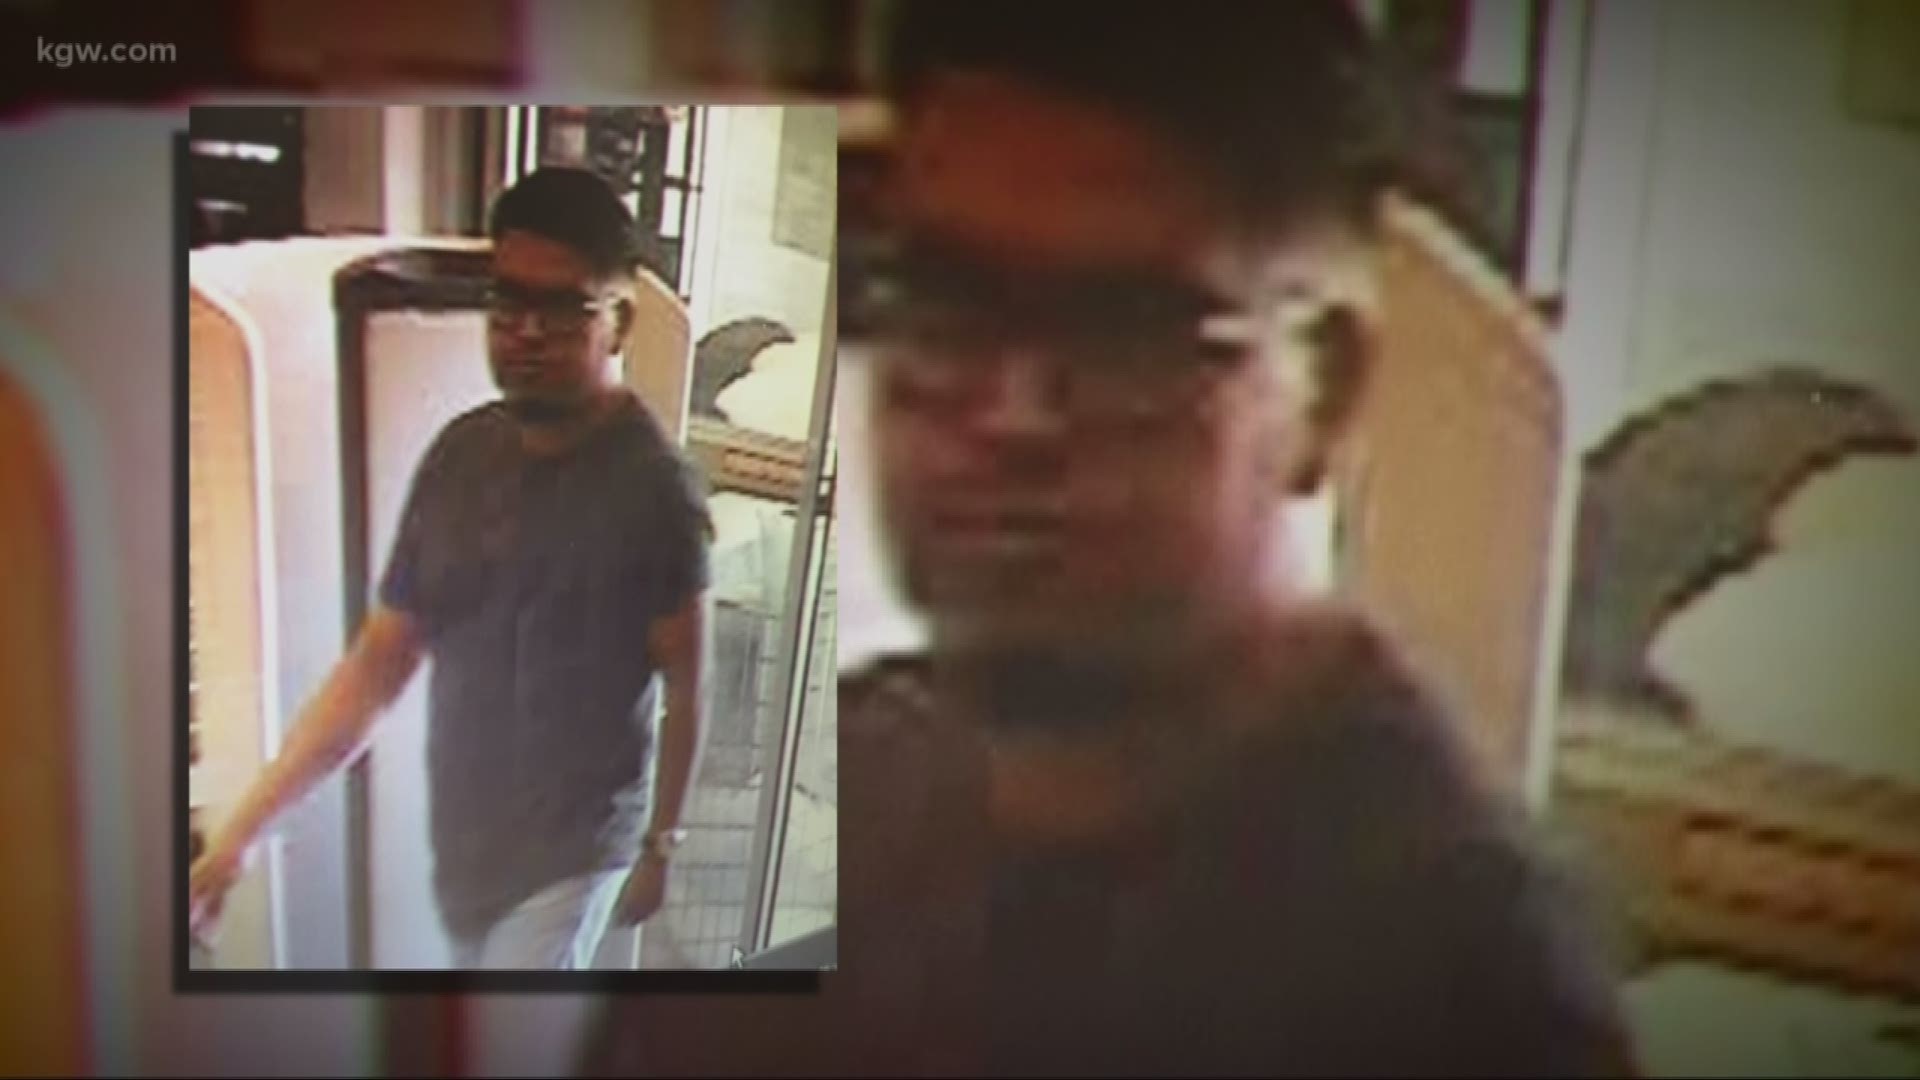 A man took up-skirt photos of a woman in Beaverton. Police are trying the find the suspect.